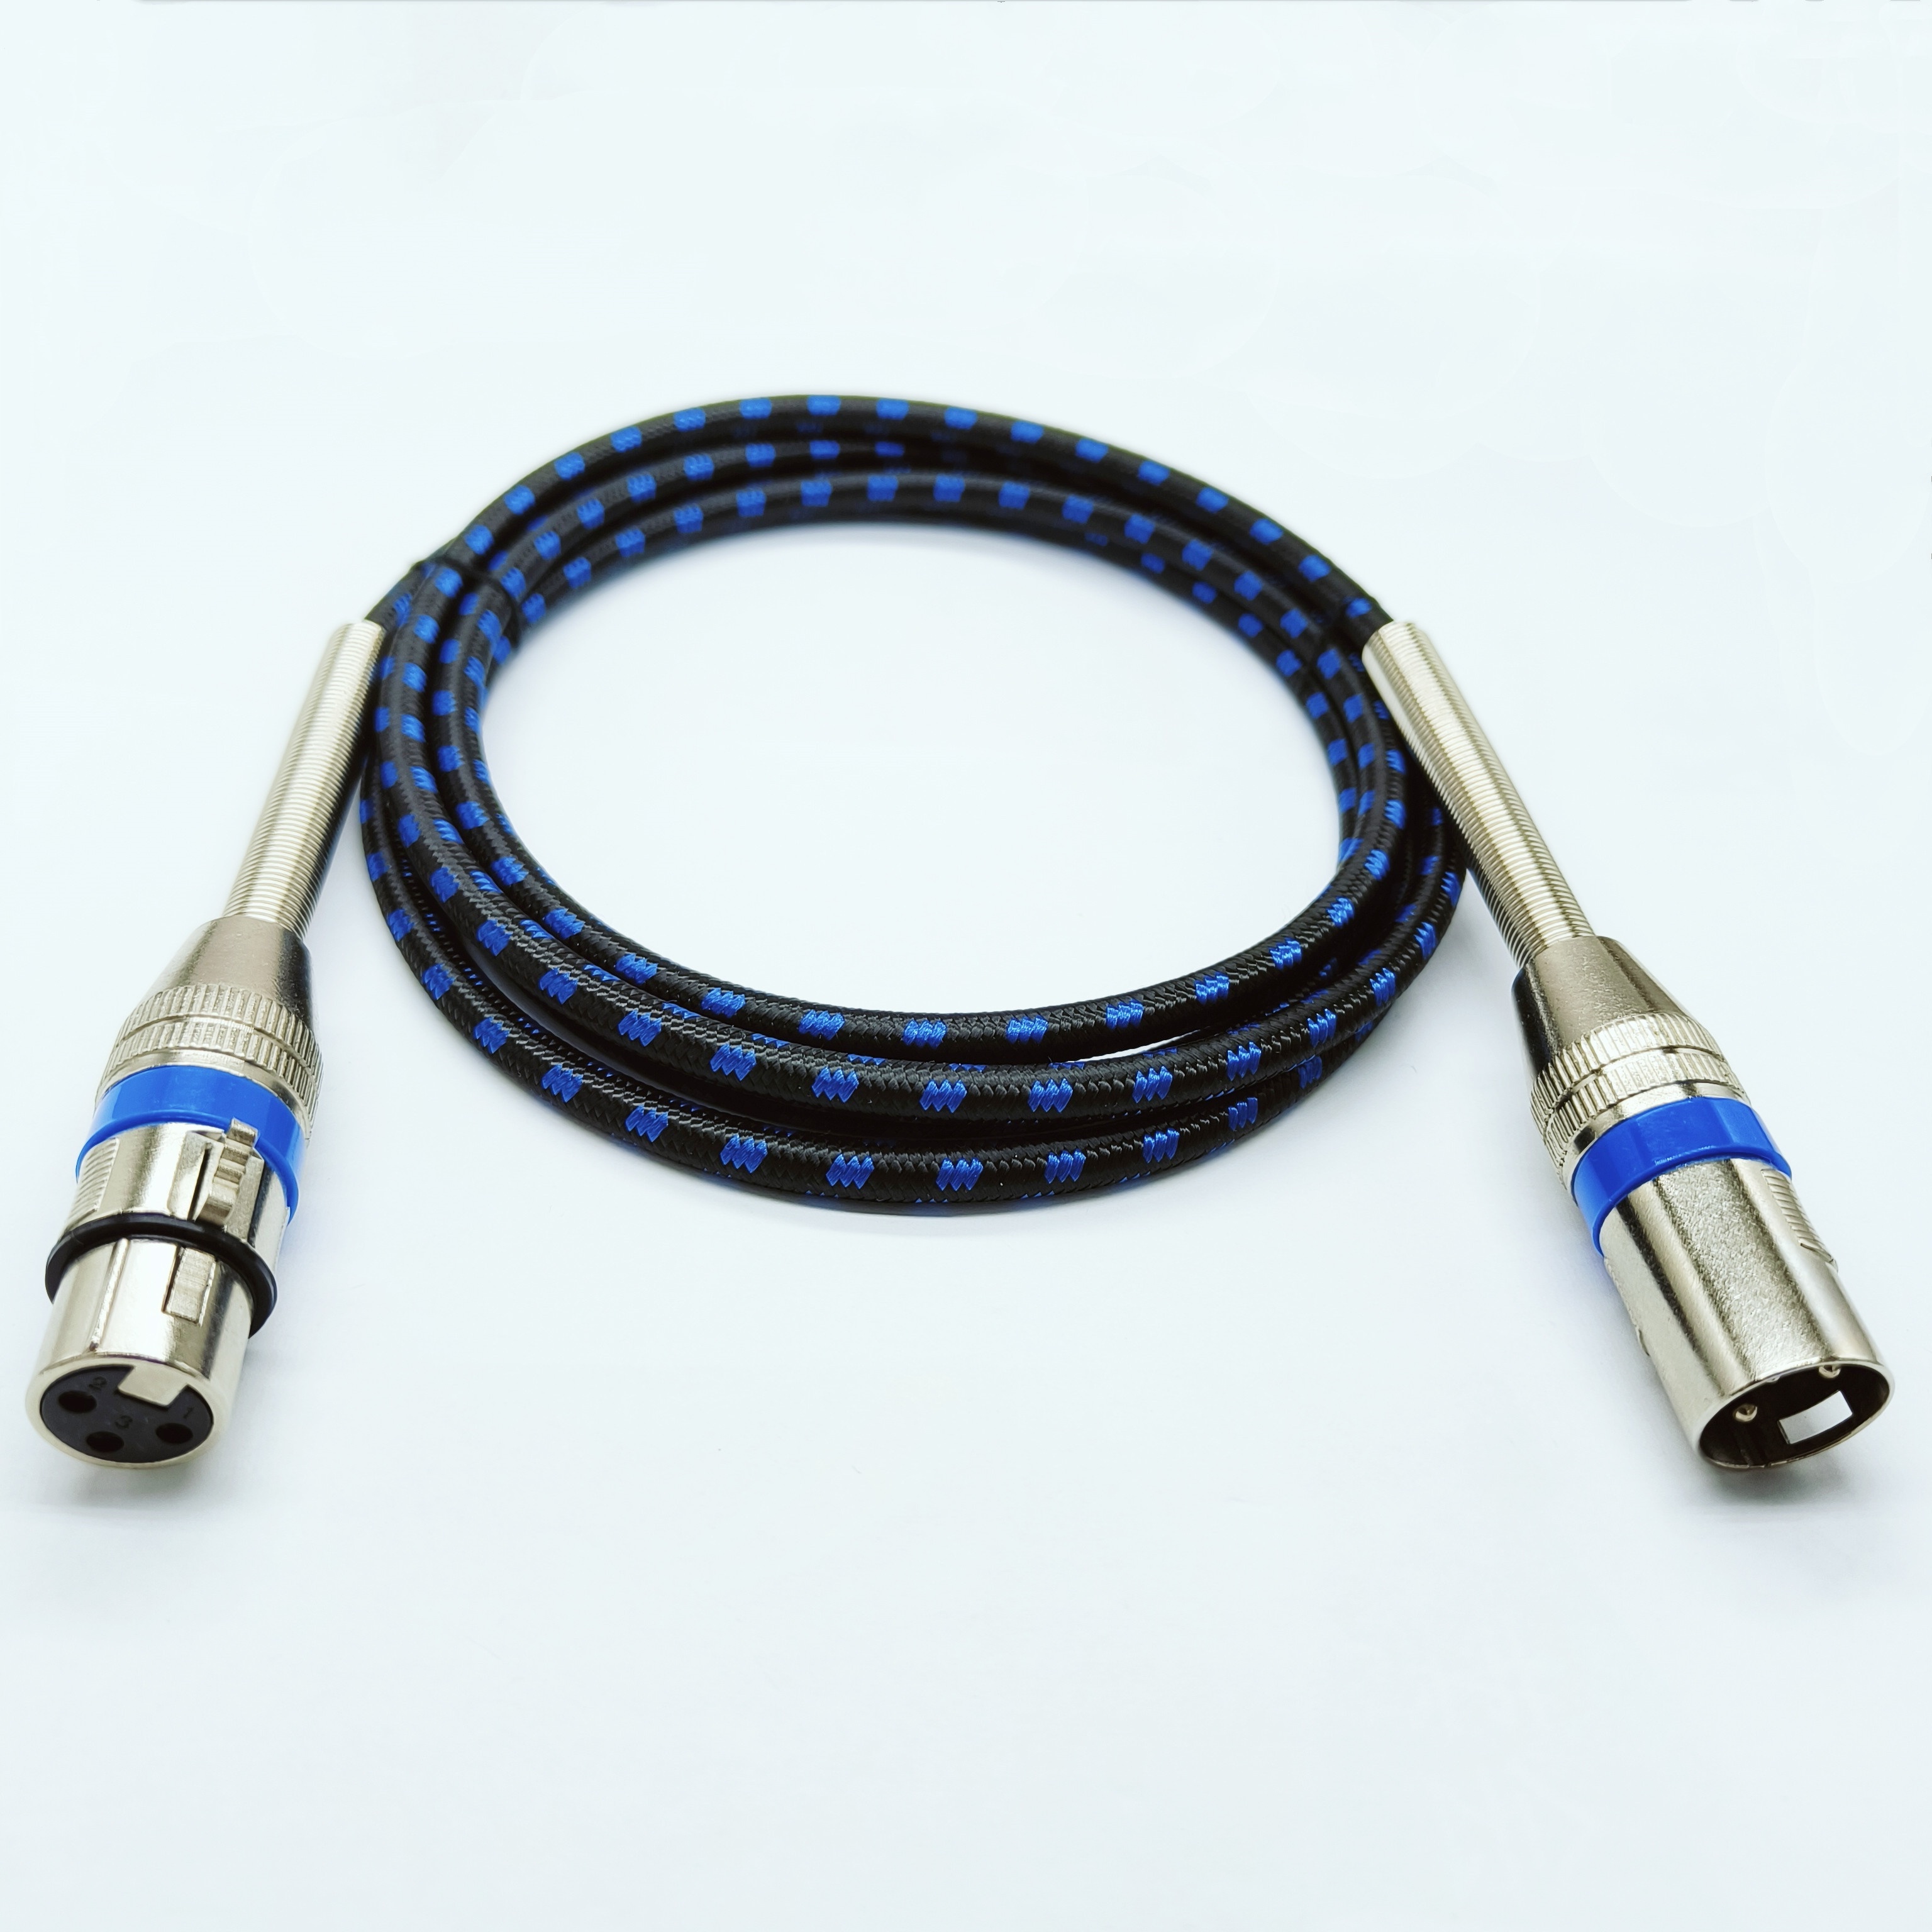 IP Rated 3-Pin DMX Cable - 3ft